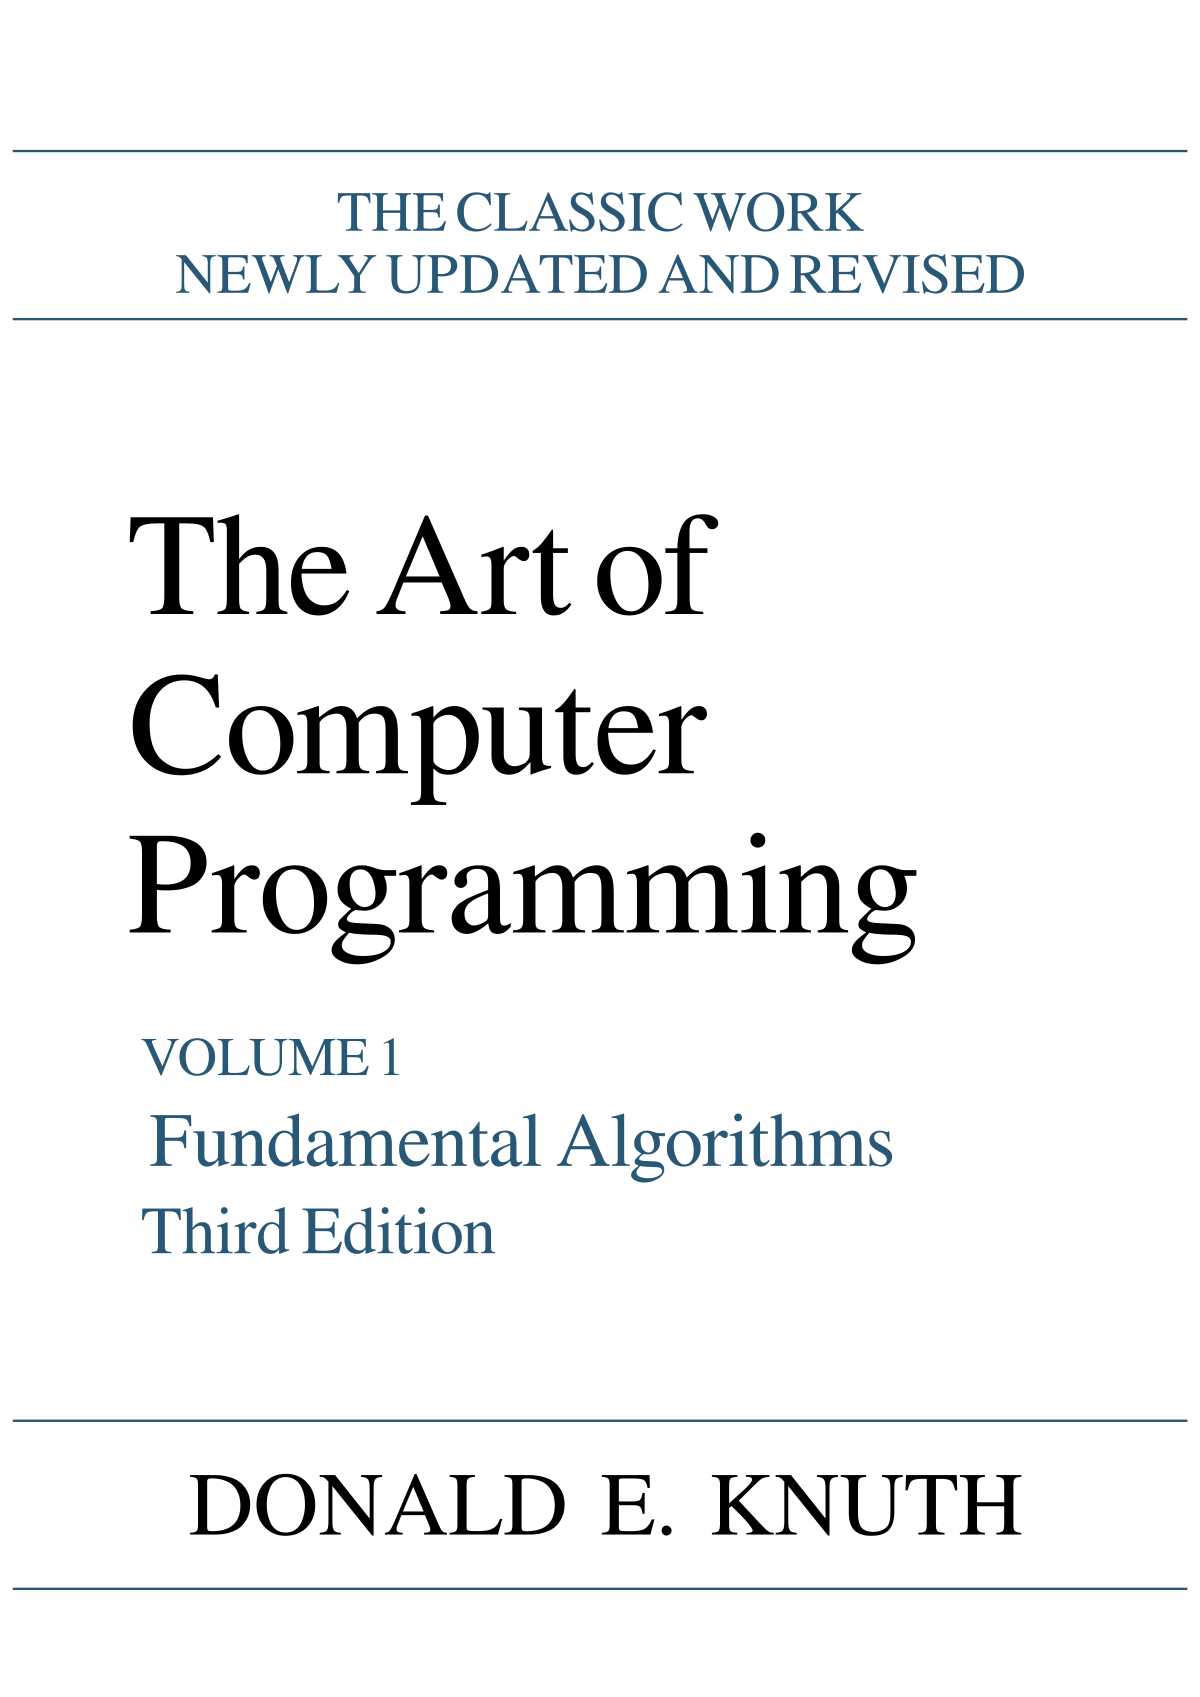 Donald Knuth. The Art of Computer Programming.